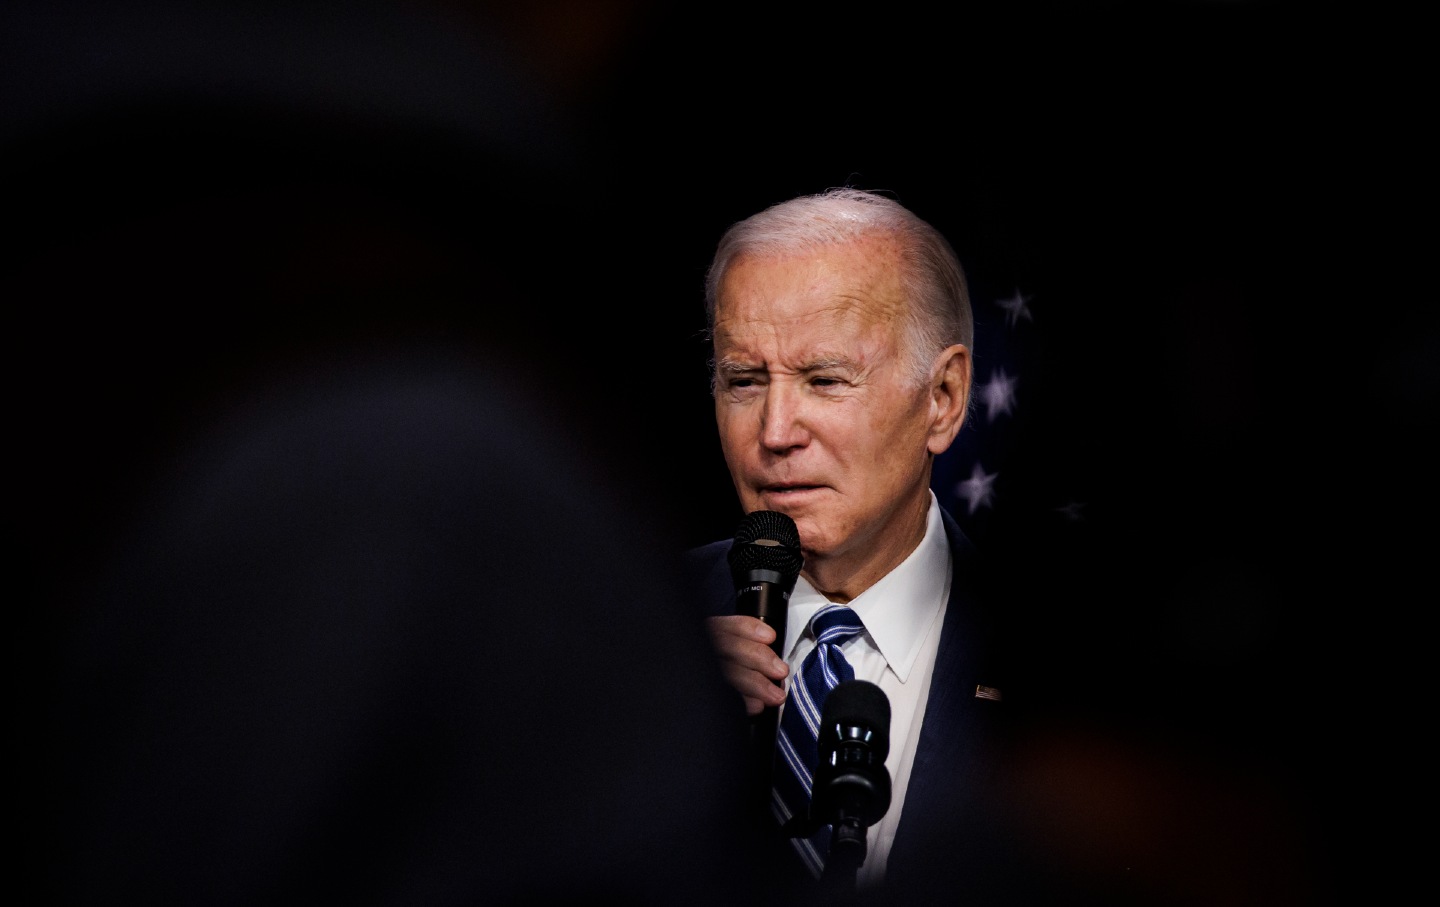 Joe Biden Promised Bold Justice Reforms. So Where Are They?